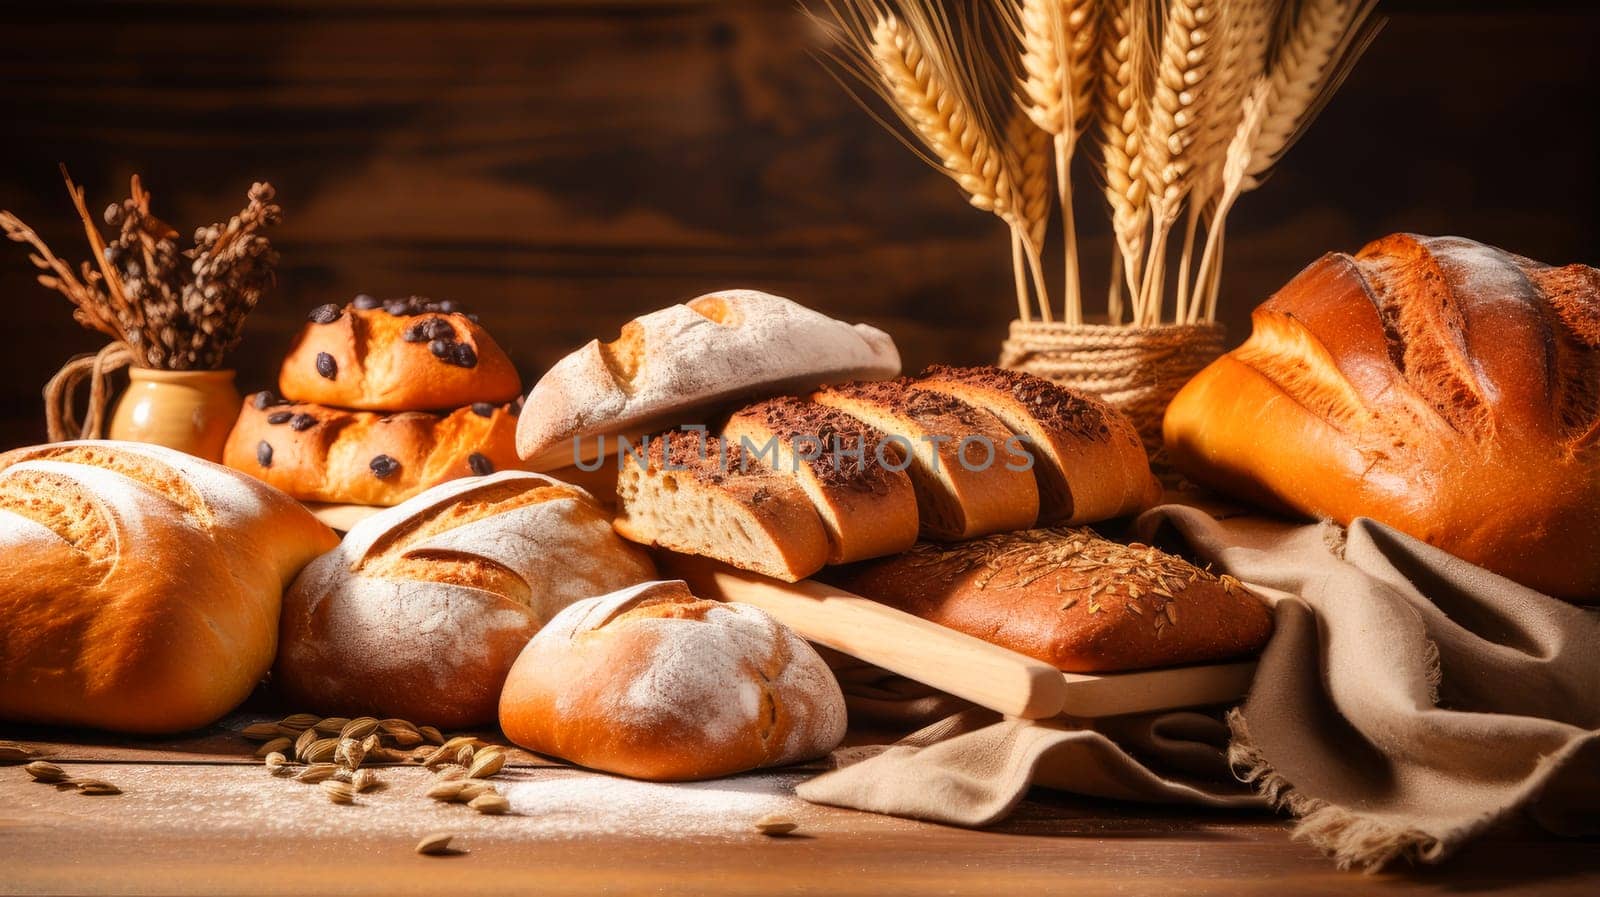 Fresh fragrant, hot bread on the table with herbs, on a wooden table, all inclusive, shop. Fresh classic pastries. Delicious food concept, private bakery, small business, self-employed, small business in the city, cozy place for communication